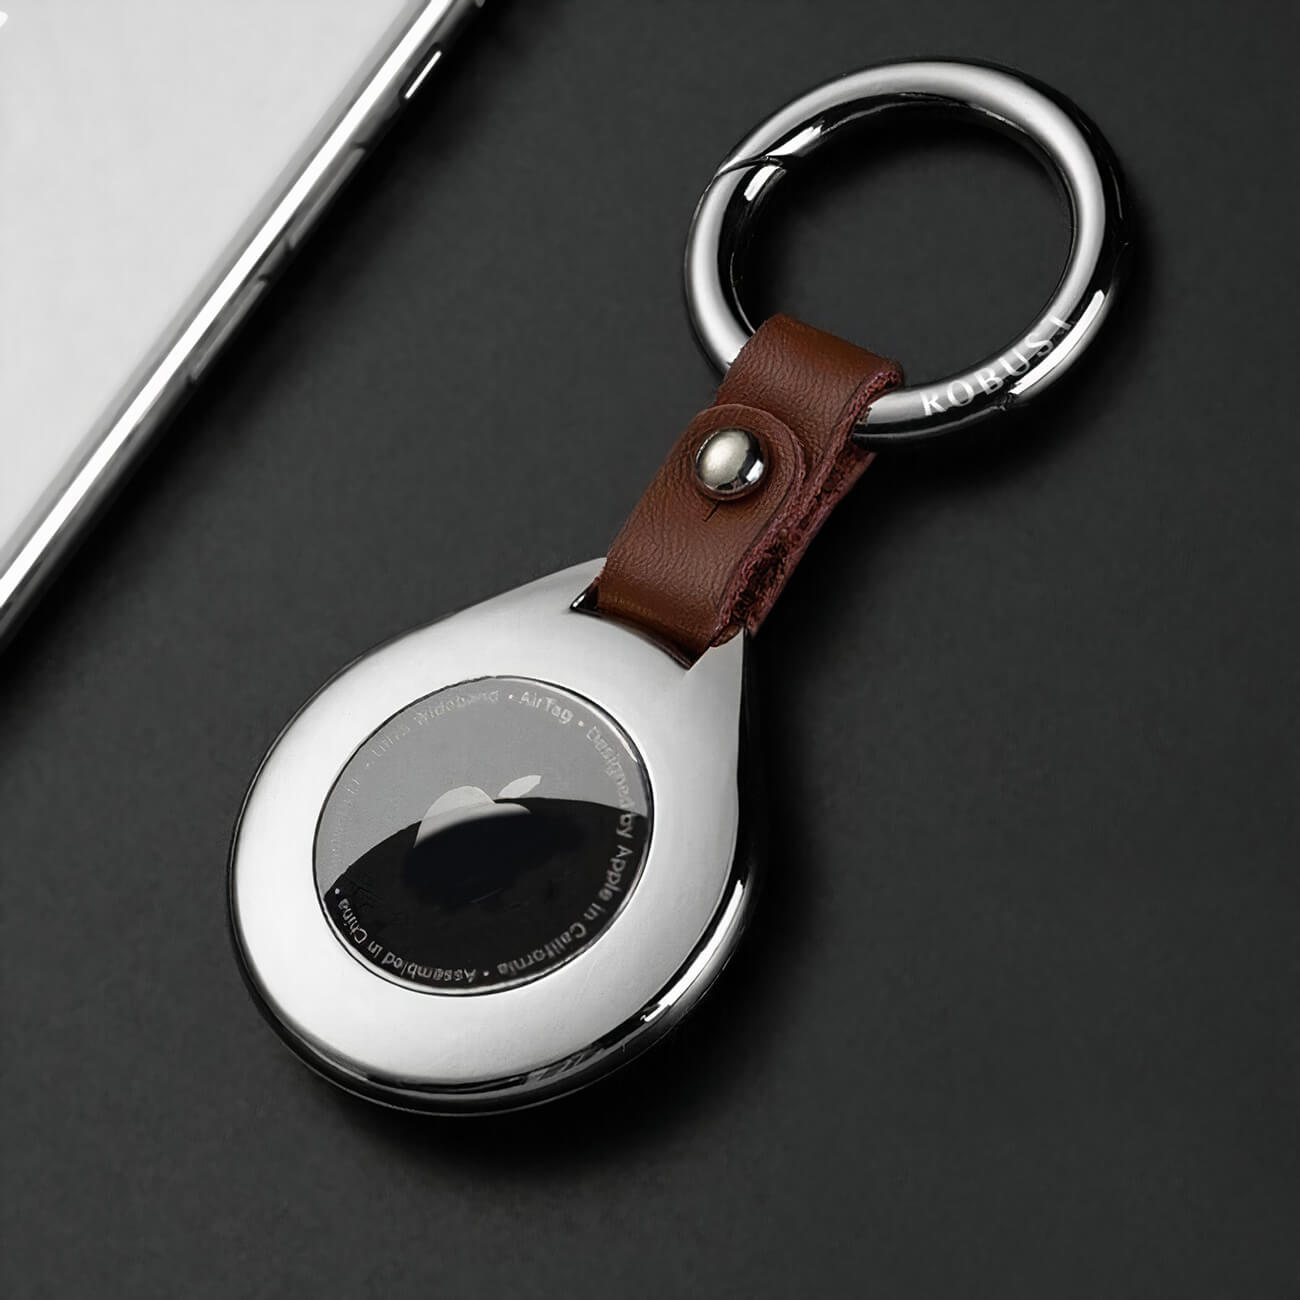 15 Luxury Airtag Accessories - The Best Airtag Keychains, Cases